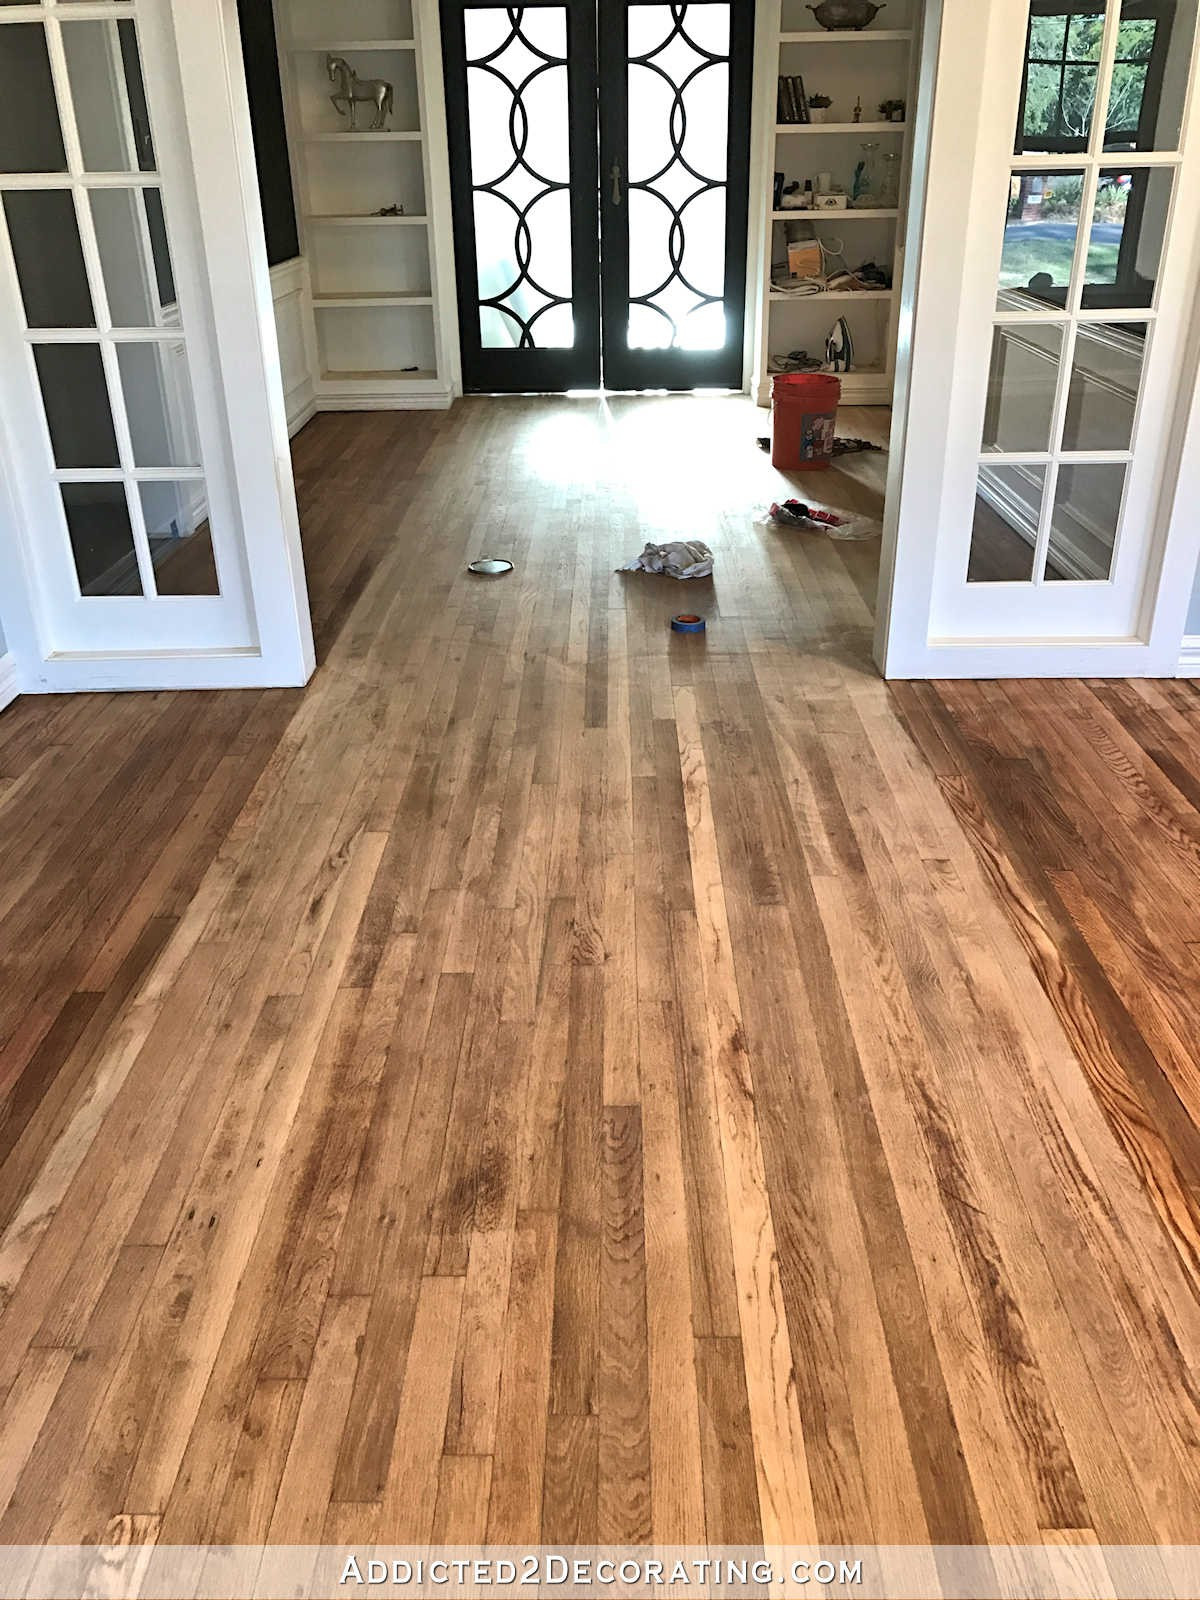 16 Lovely Price for Sanding and Refinishing Hardwood Floors 2022 free download price for sanding and refinishing hardwood floors of 19 unique how much does it cost to refinish hardwood floors gallery intended for how much does it cost to refinish hardwood floors unique